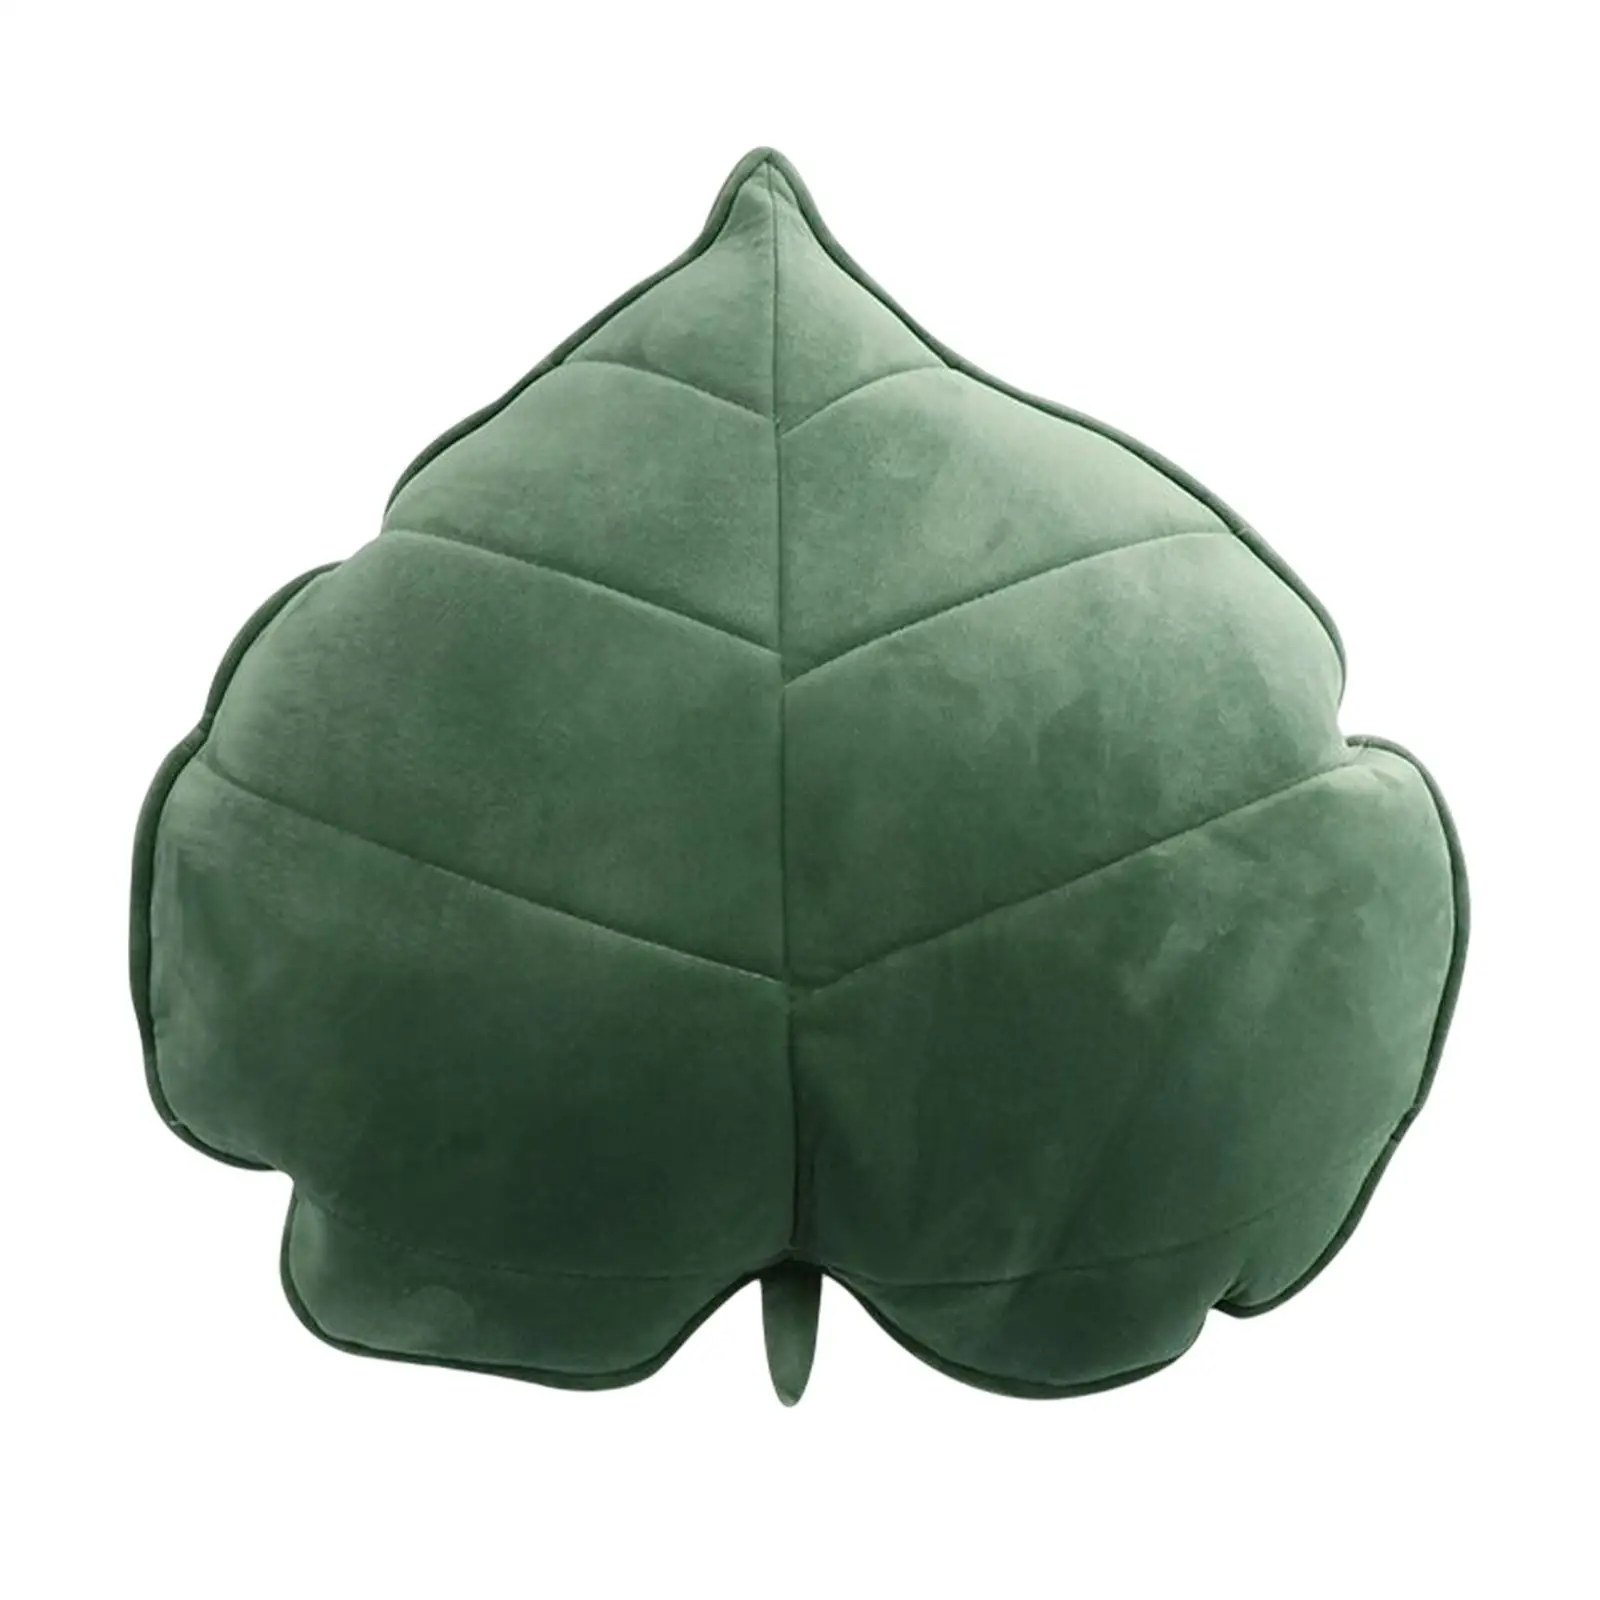 Cute Seat Cushion Body Pillow Sleeping Accompany Toy Stuffed Toy Leaf Appearance Plush Hug Pillow for Spring Home Decoration